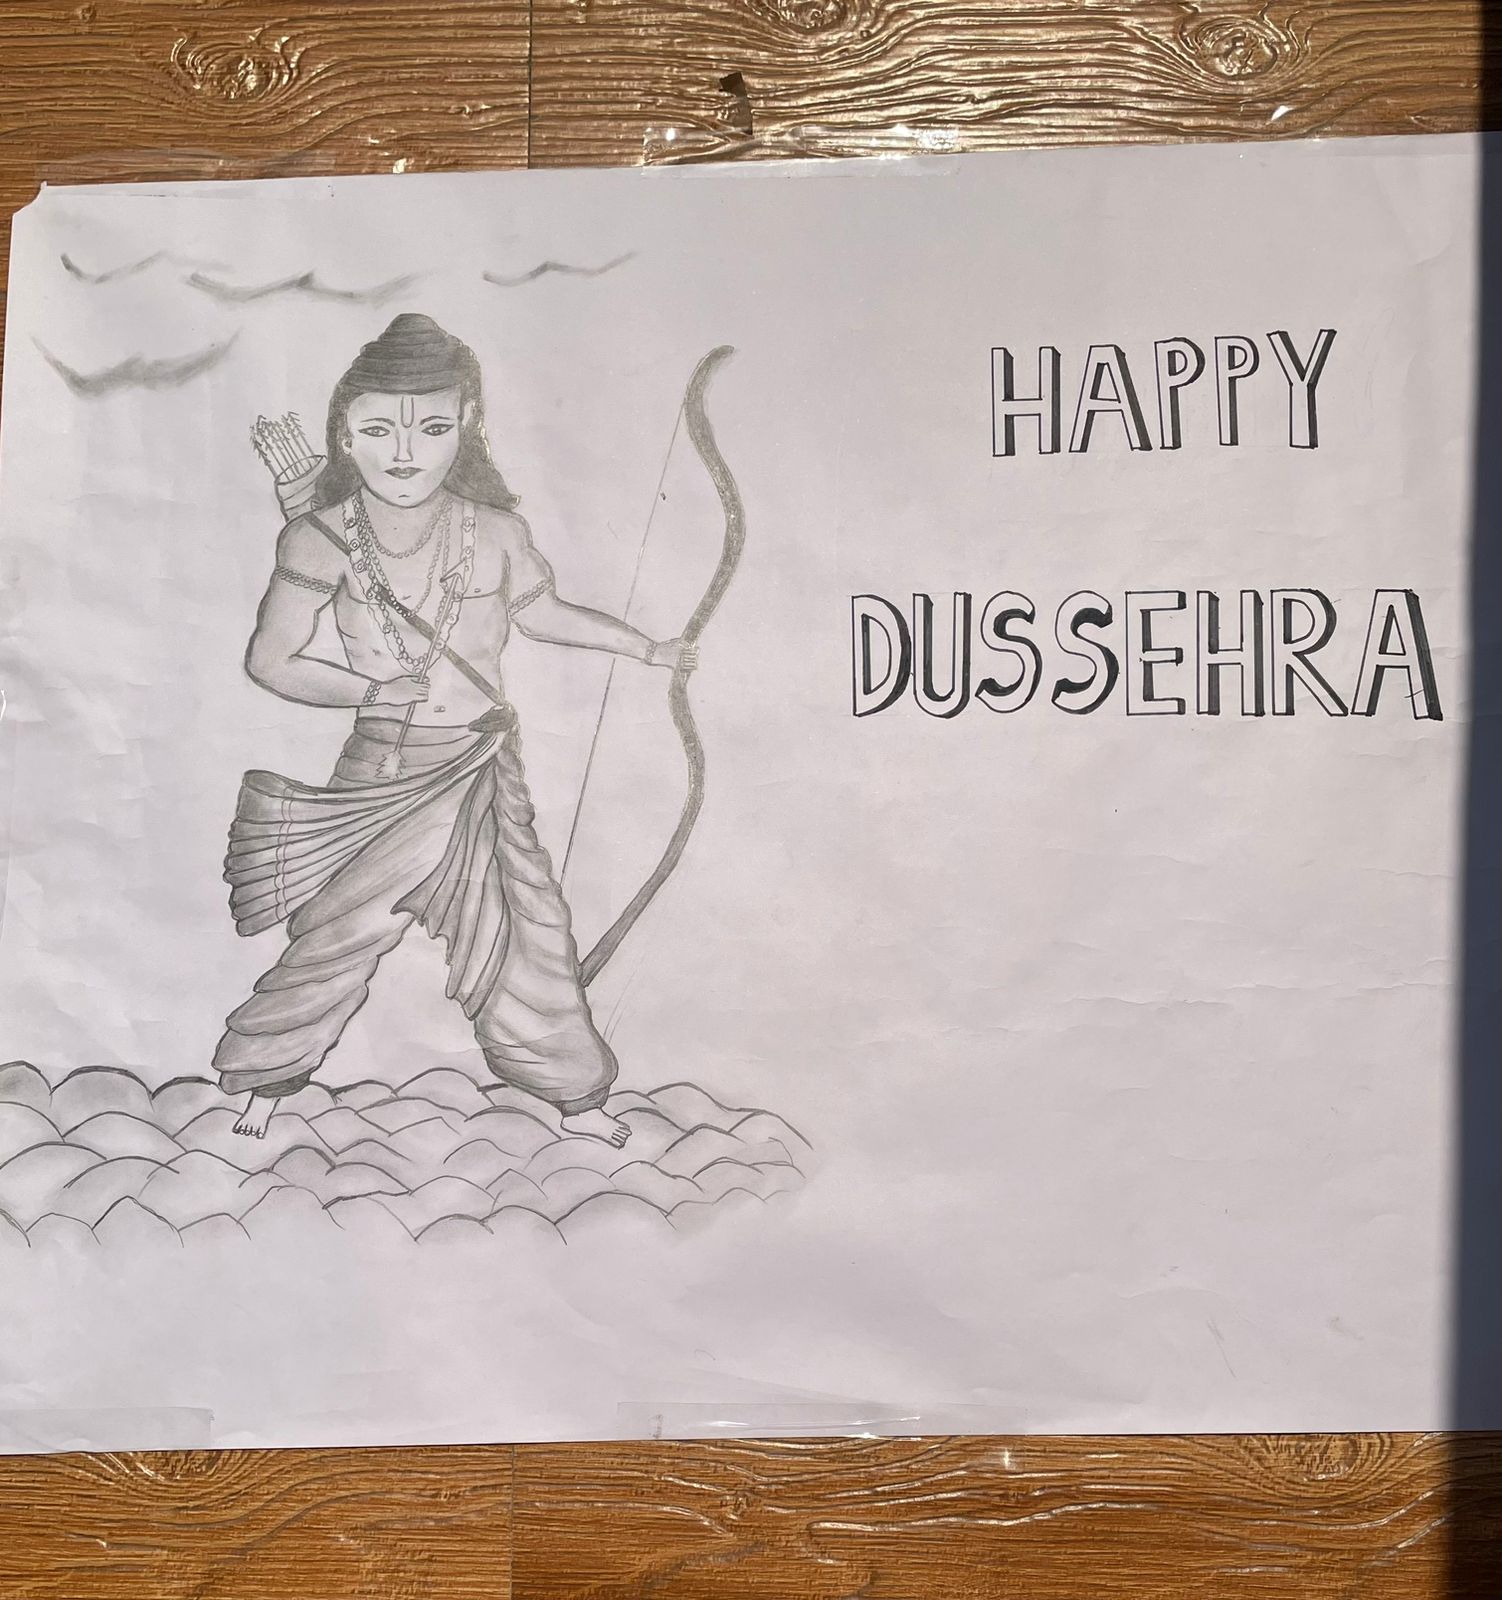 Happy Dussehra 2021: Images, Wishes, Messages, Quotes, Pictures and  Greeting Cards | The Times of India